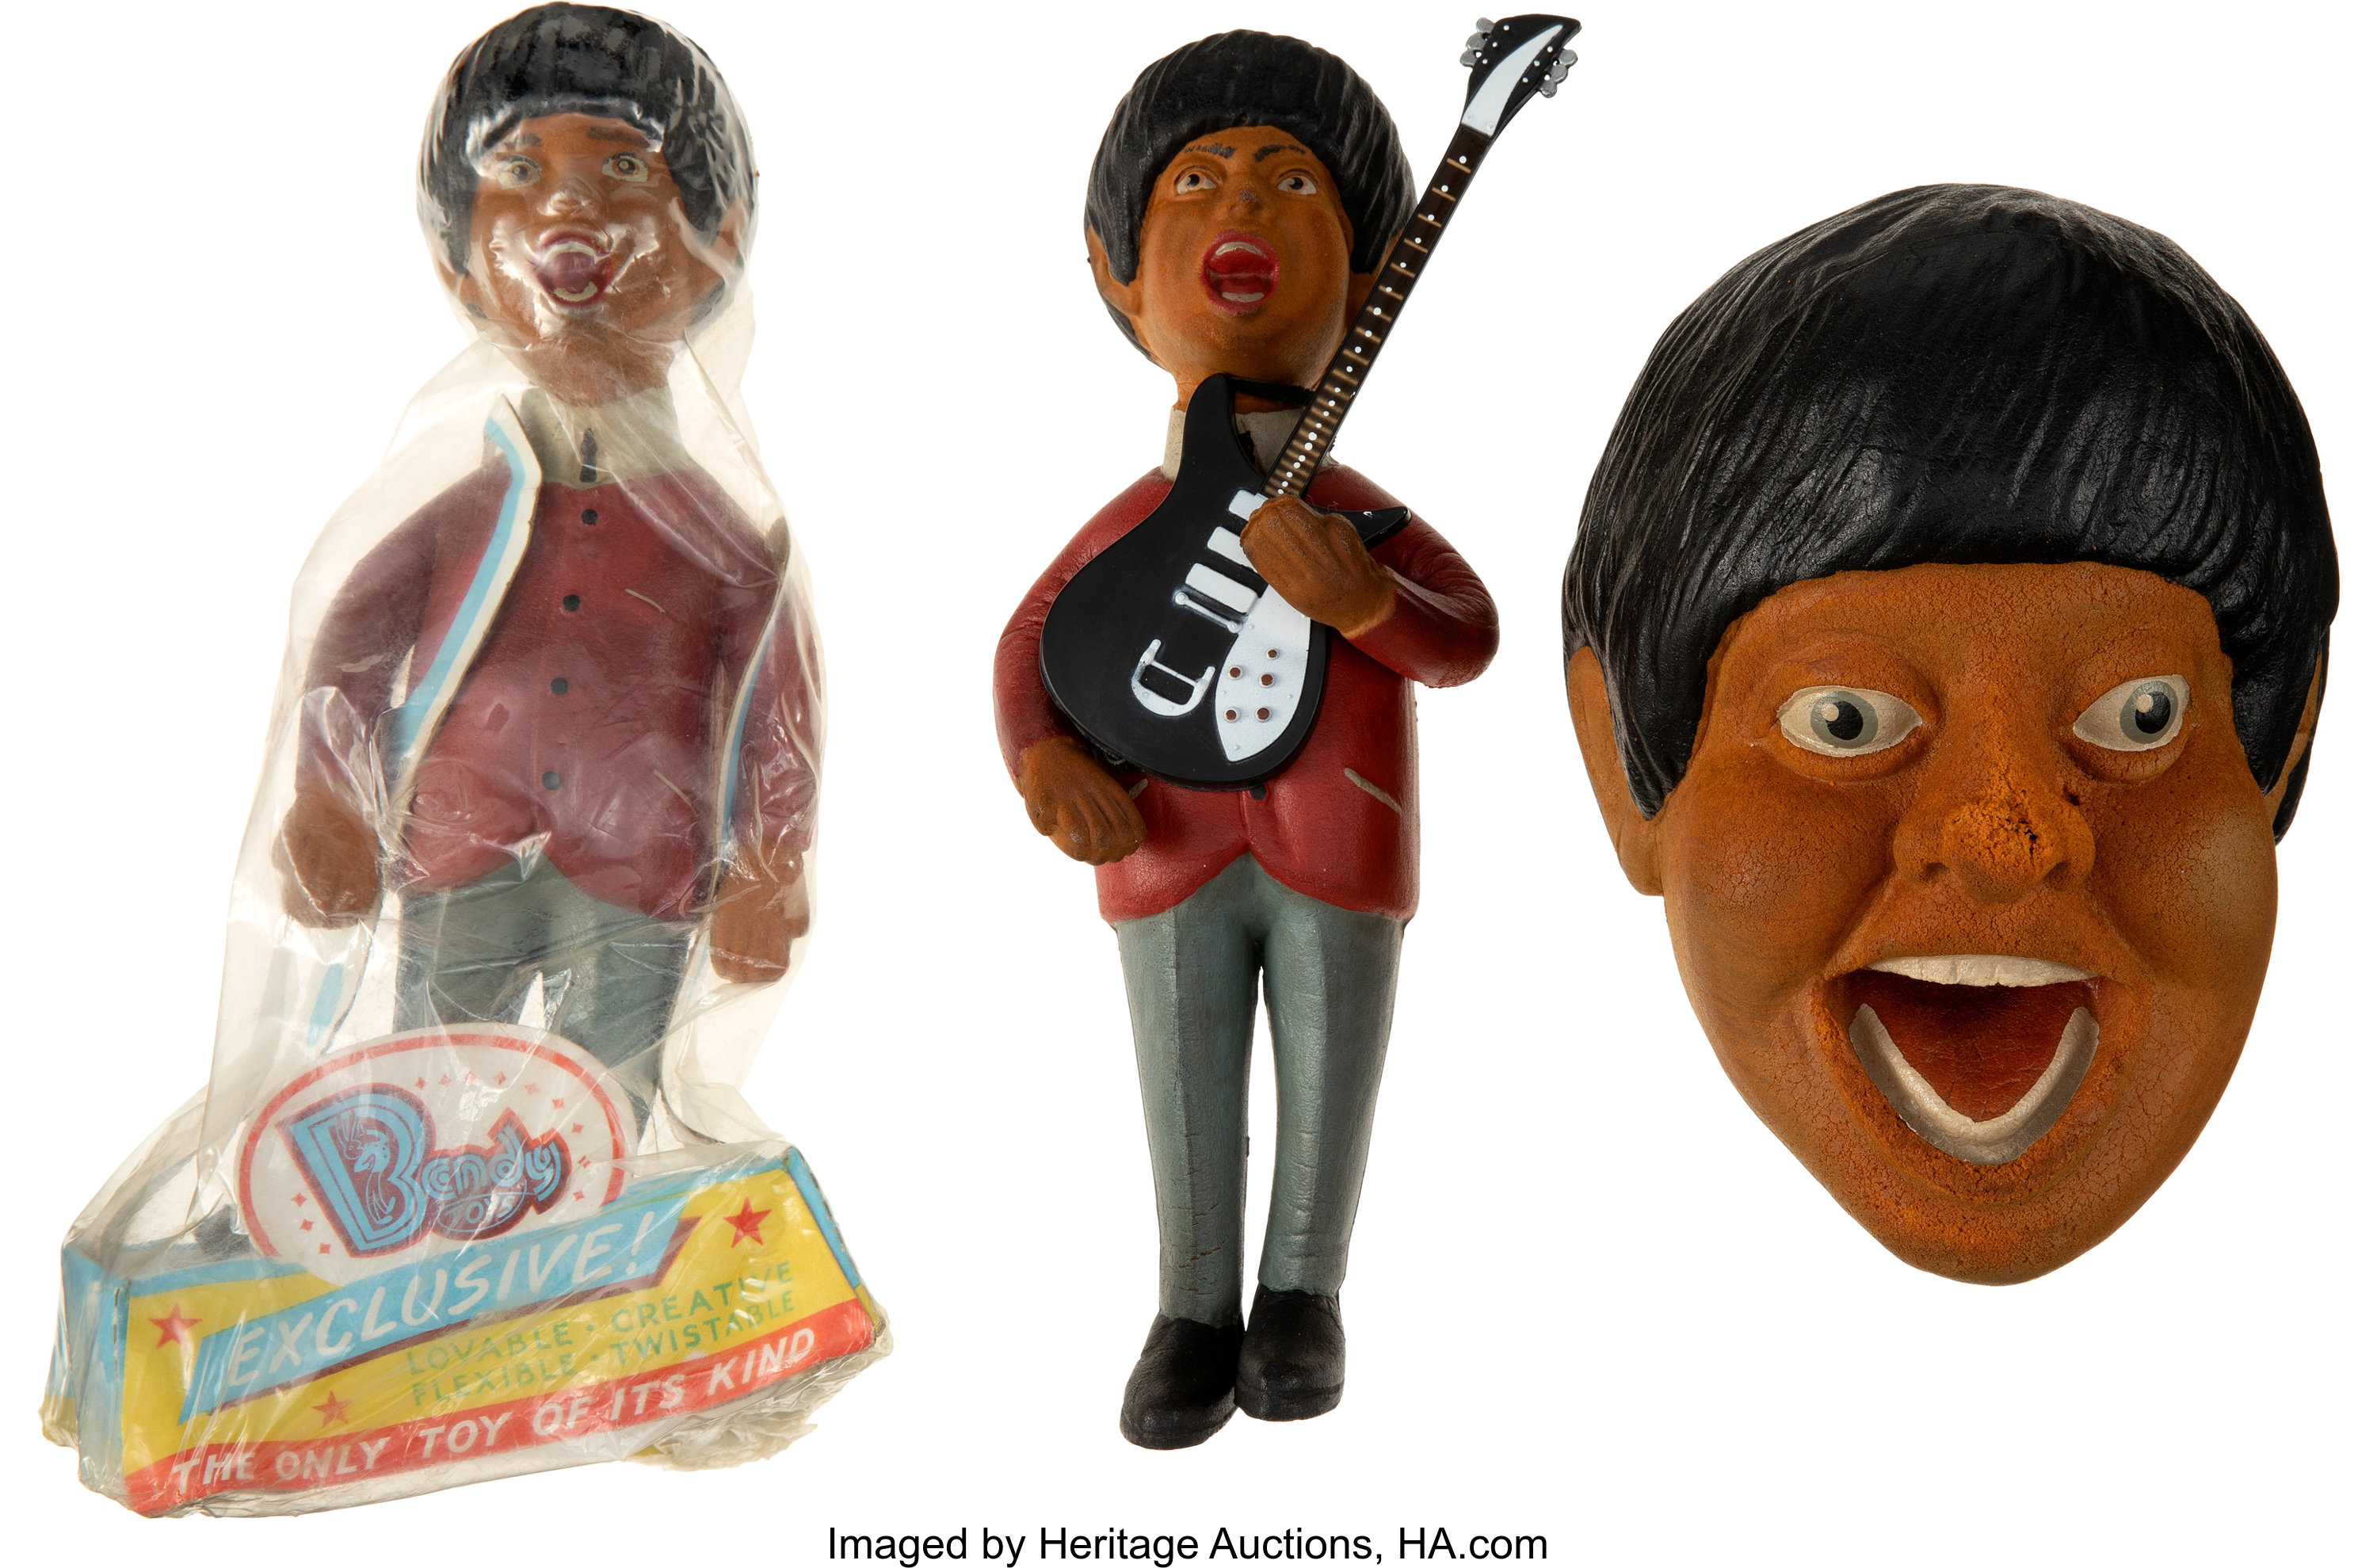 The Beatles Paul Mccartney Bendy Toy In Pkg Paul Out Of Pkg Lot 89779 Heritage Auctions